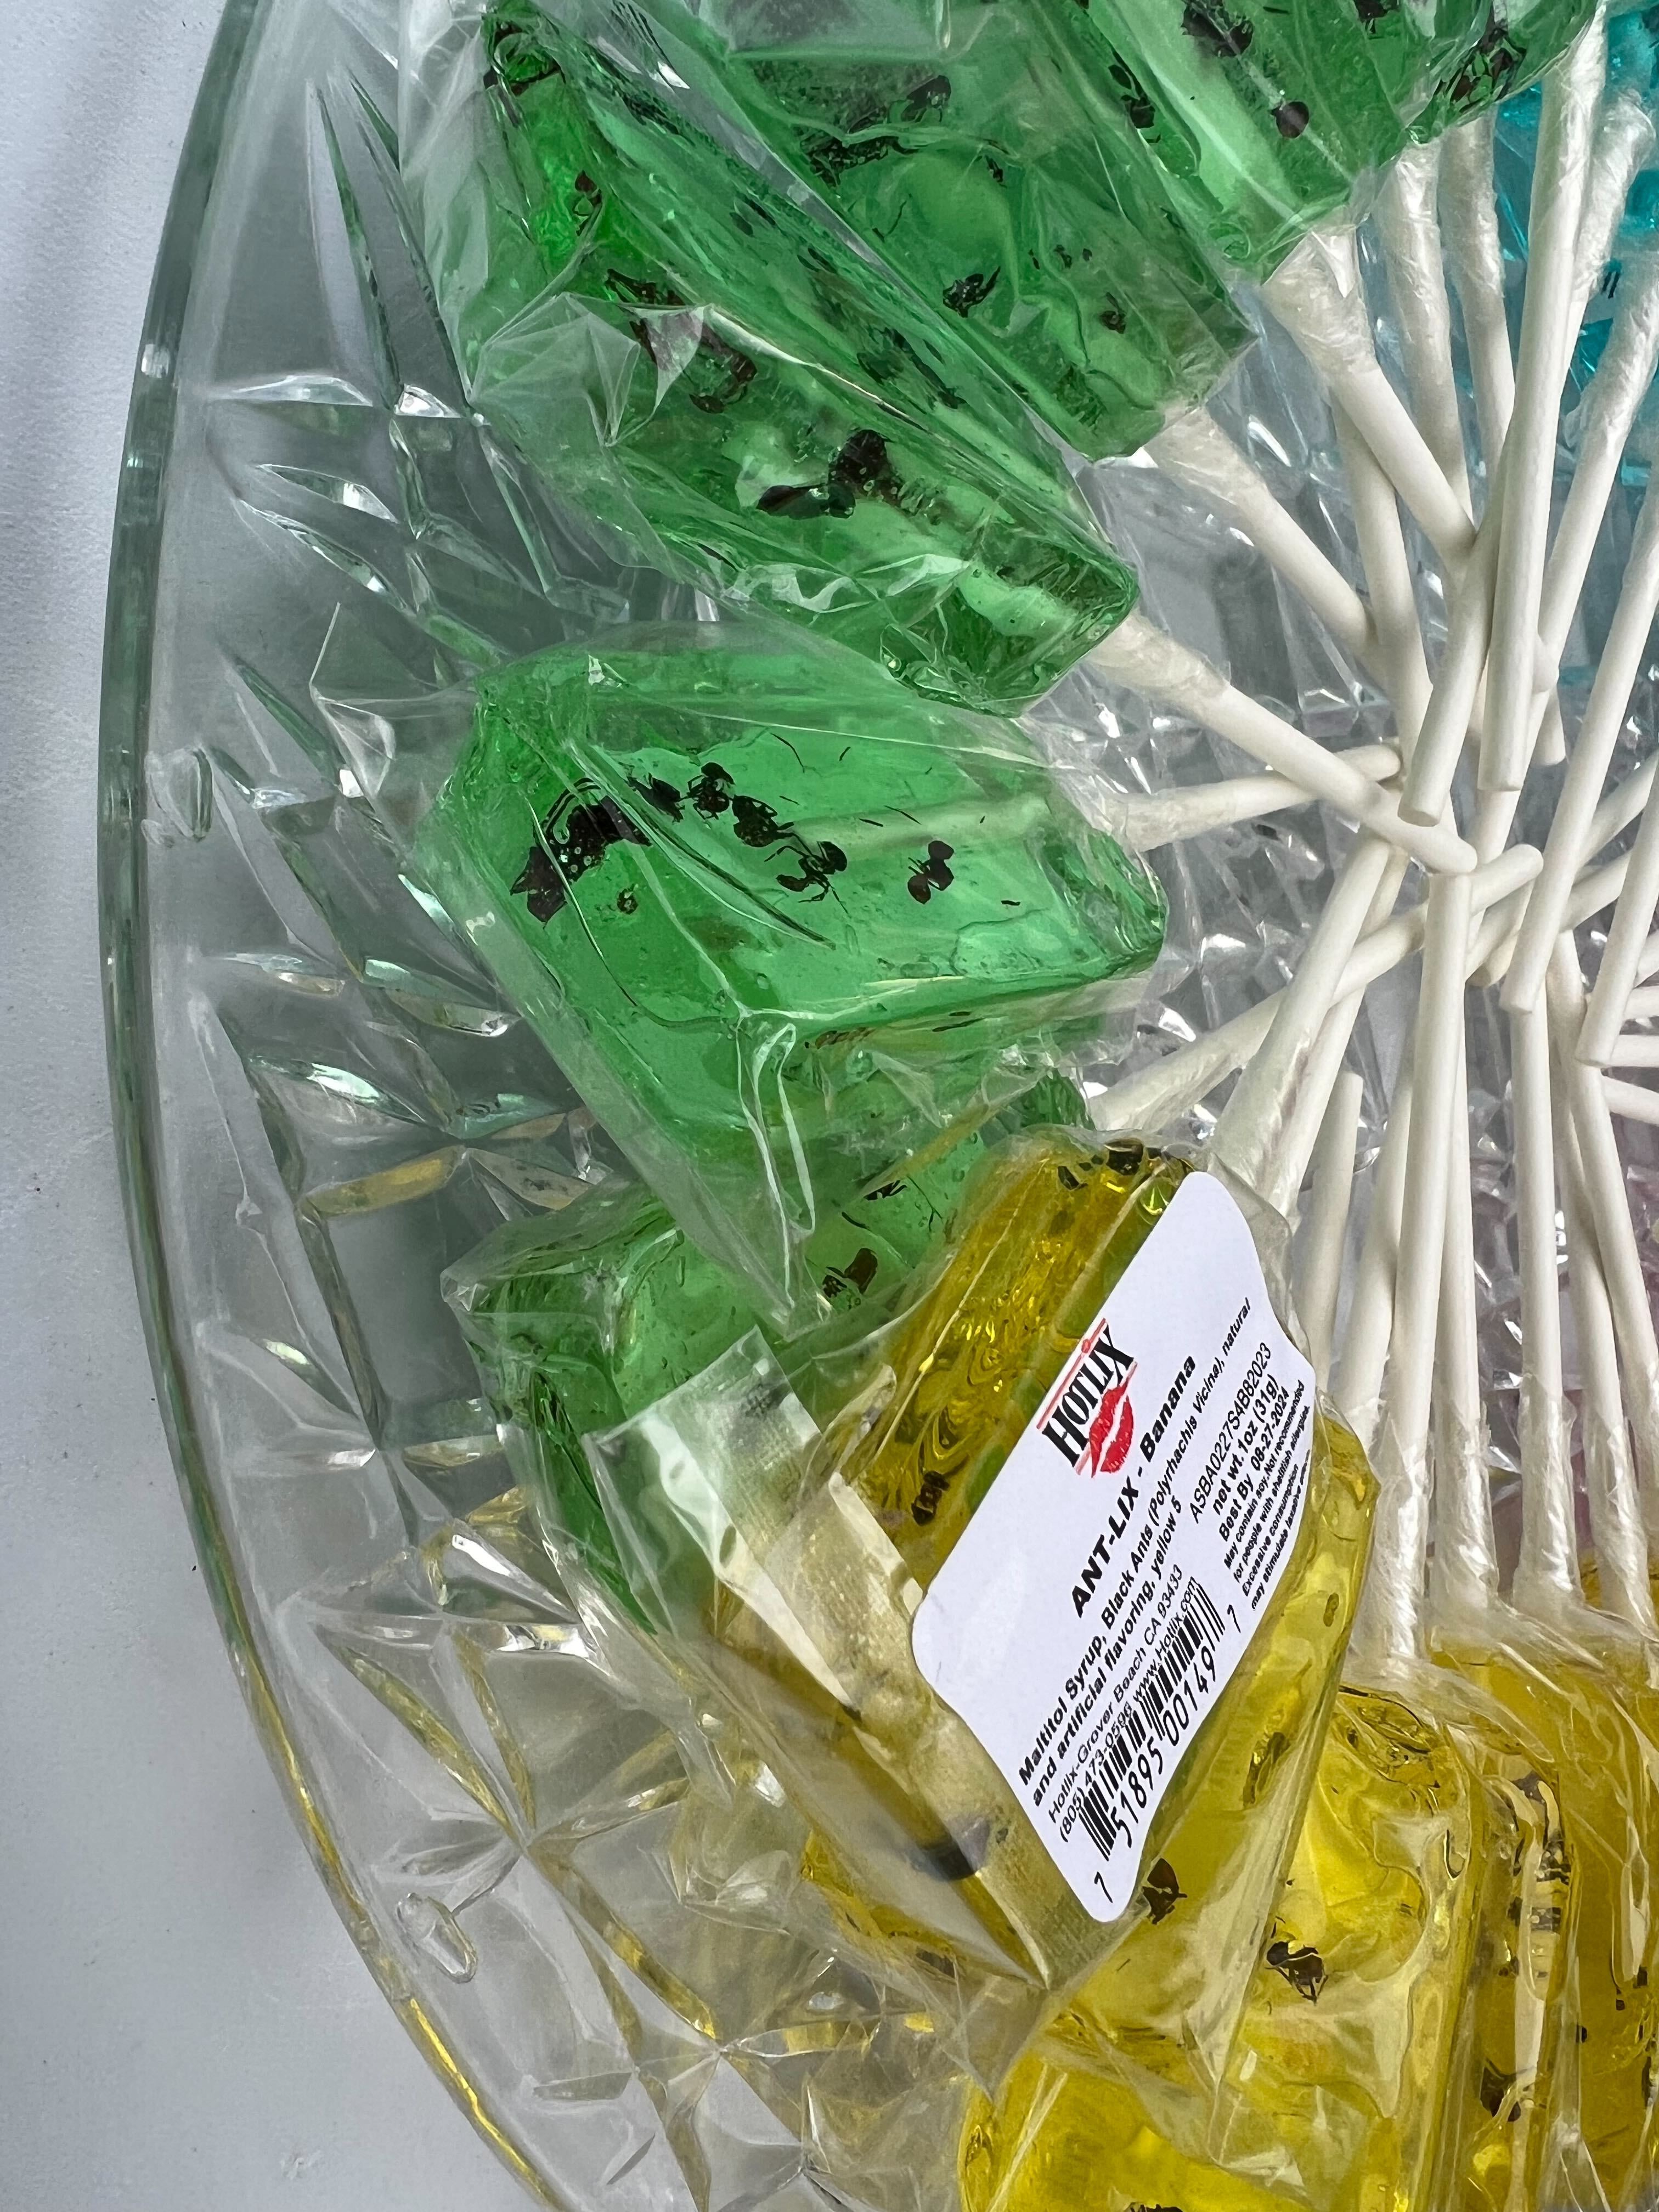 Ant lollipops available for snacks at the Bats event, Anita Purves Nature Center